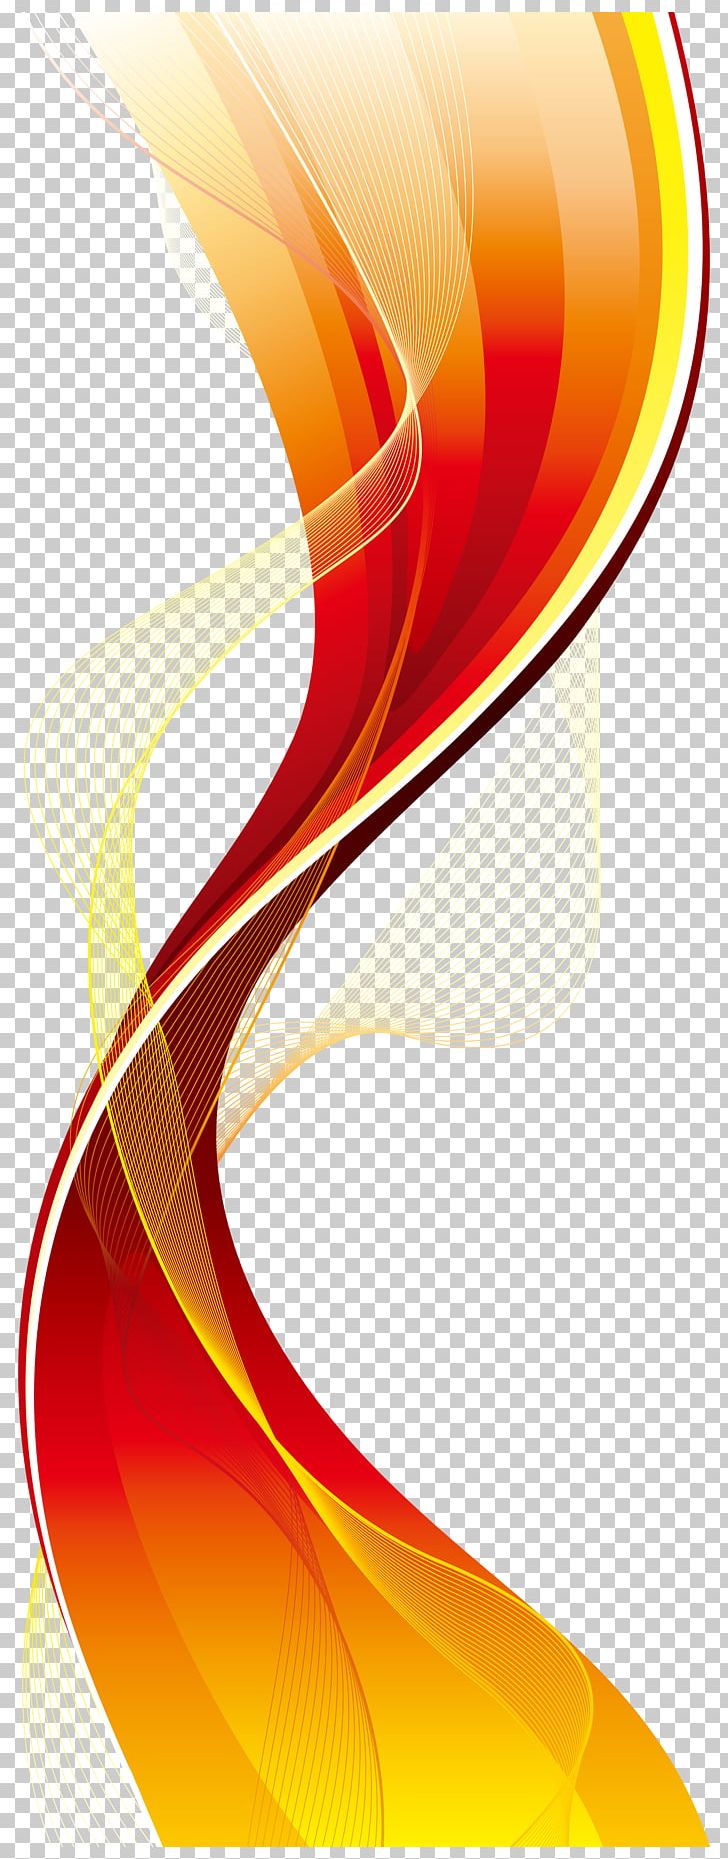 Curve Graphic Design Red PNG, Clipart, Angle, Blue, Circle, Color ...